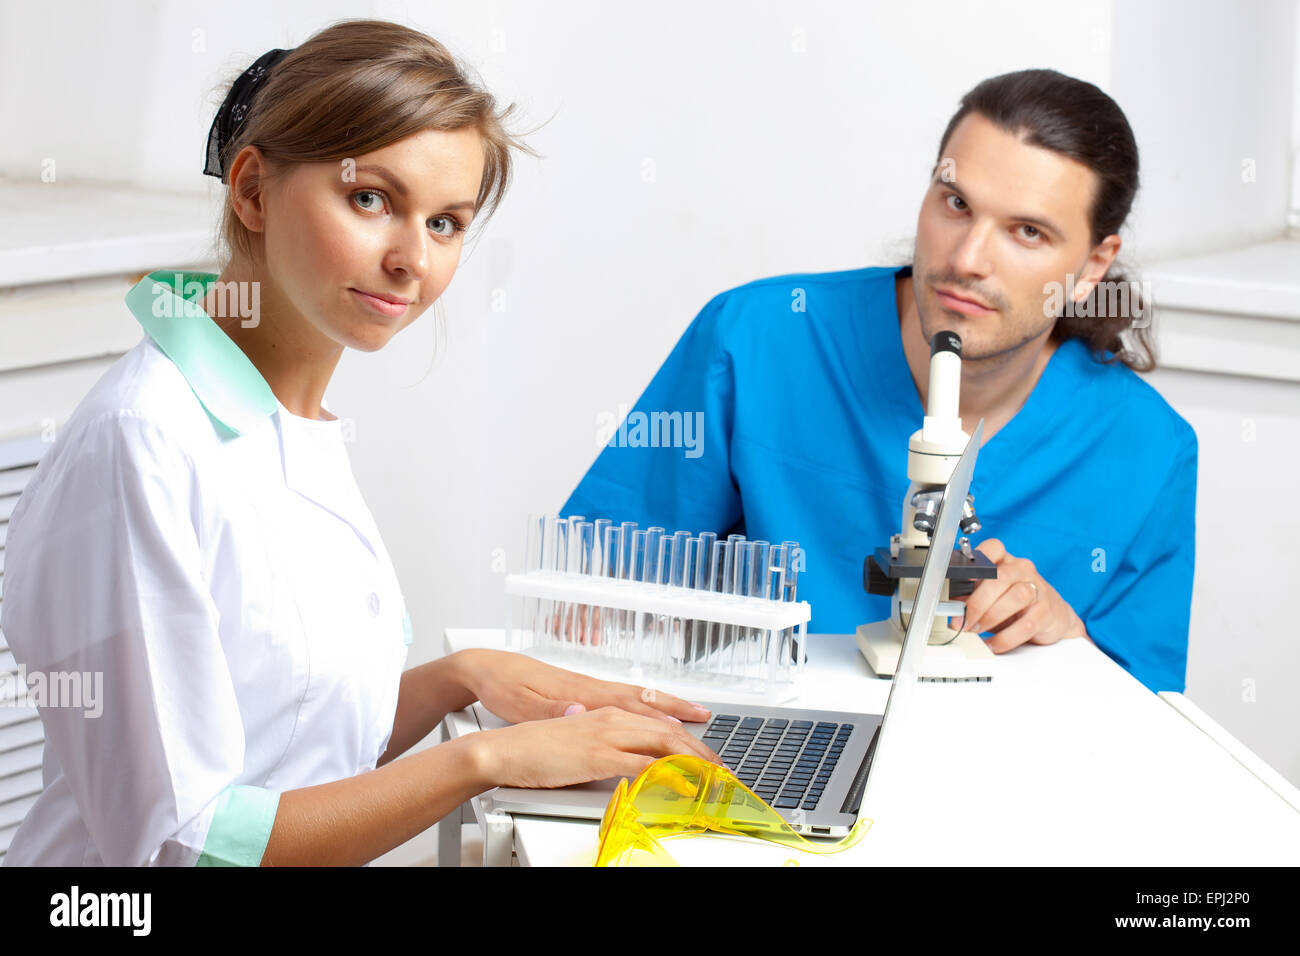 group of scientists Stock Photo